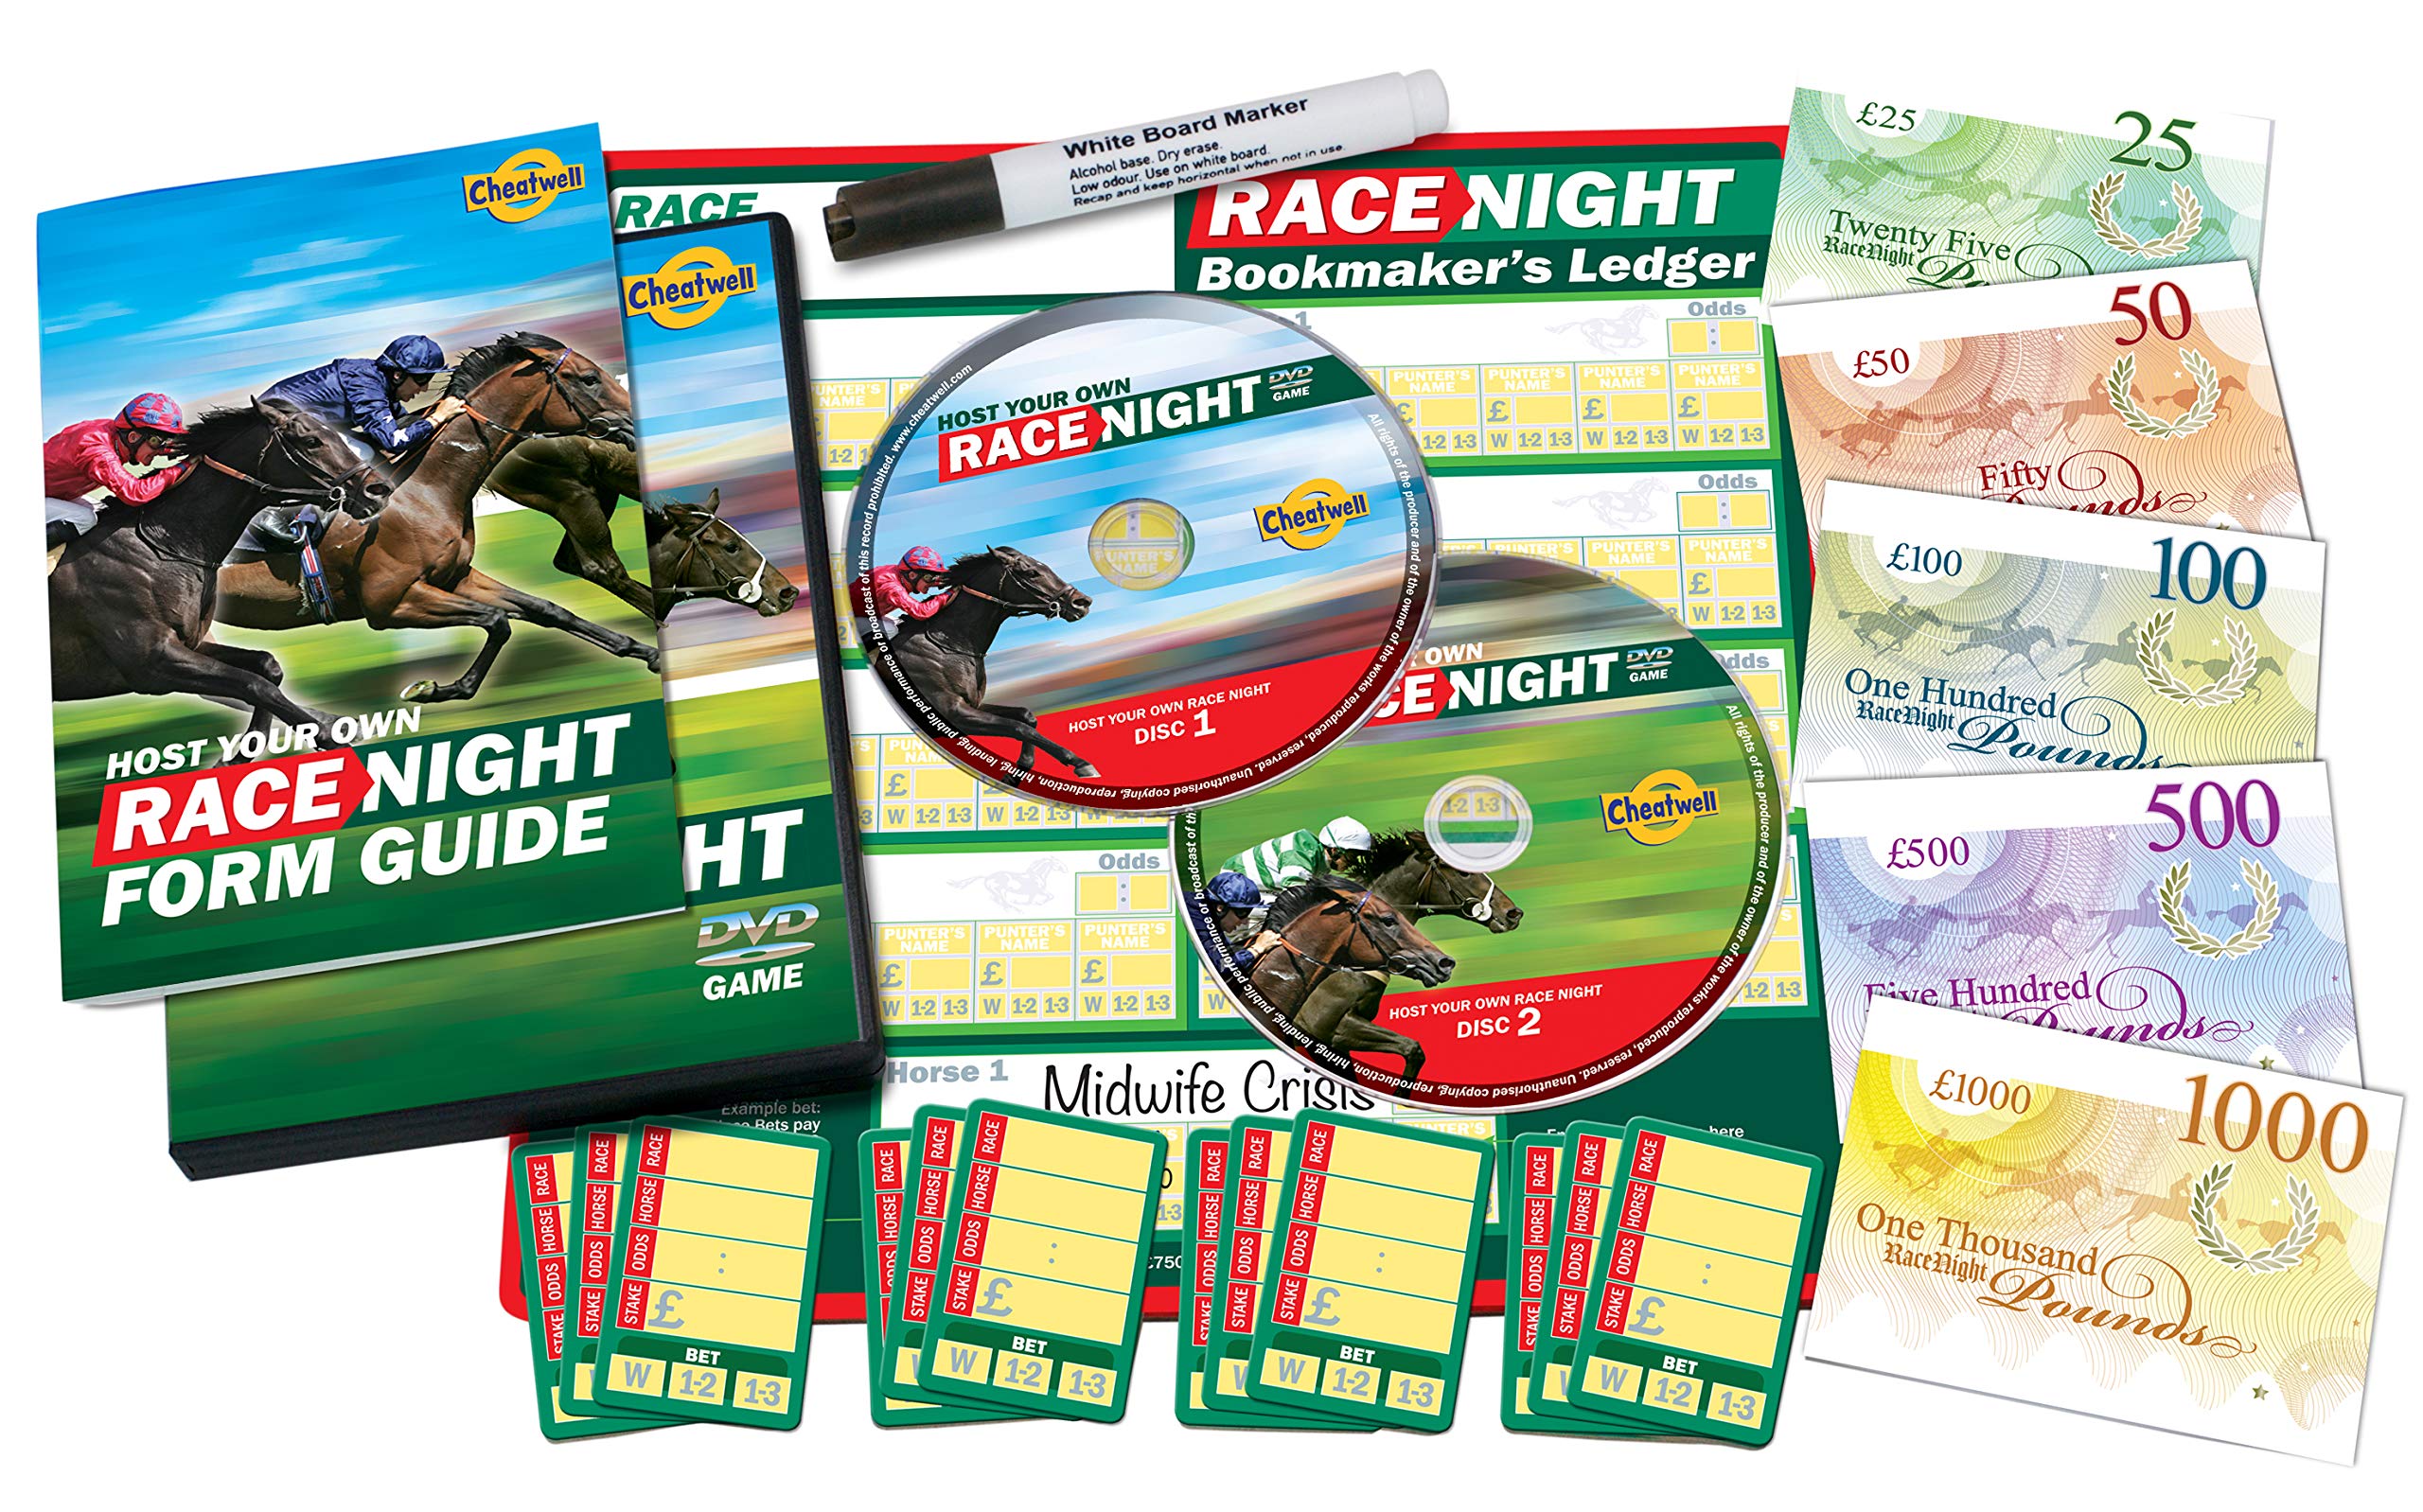 Cheatwell Games Host Your Own Race Night